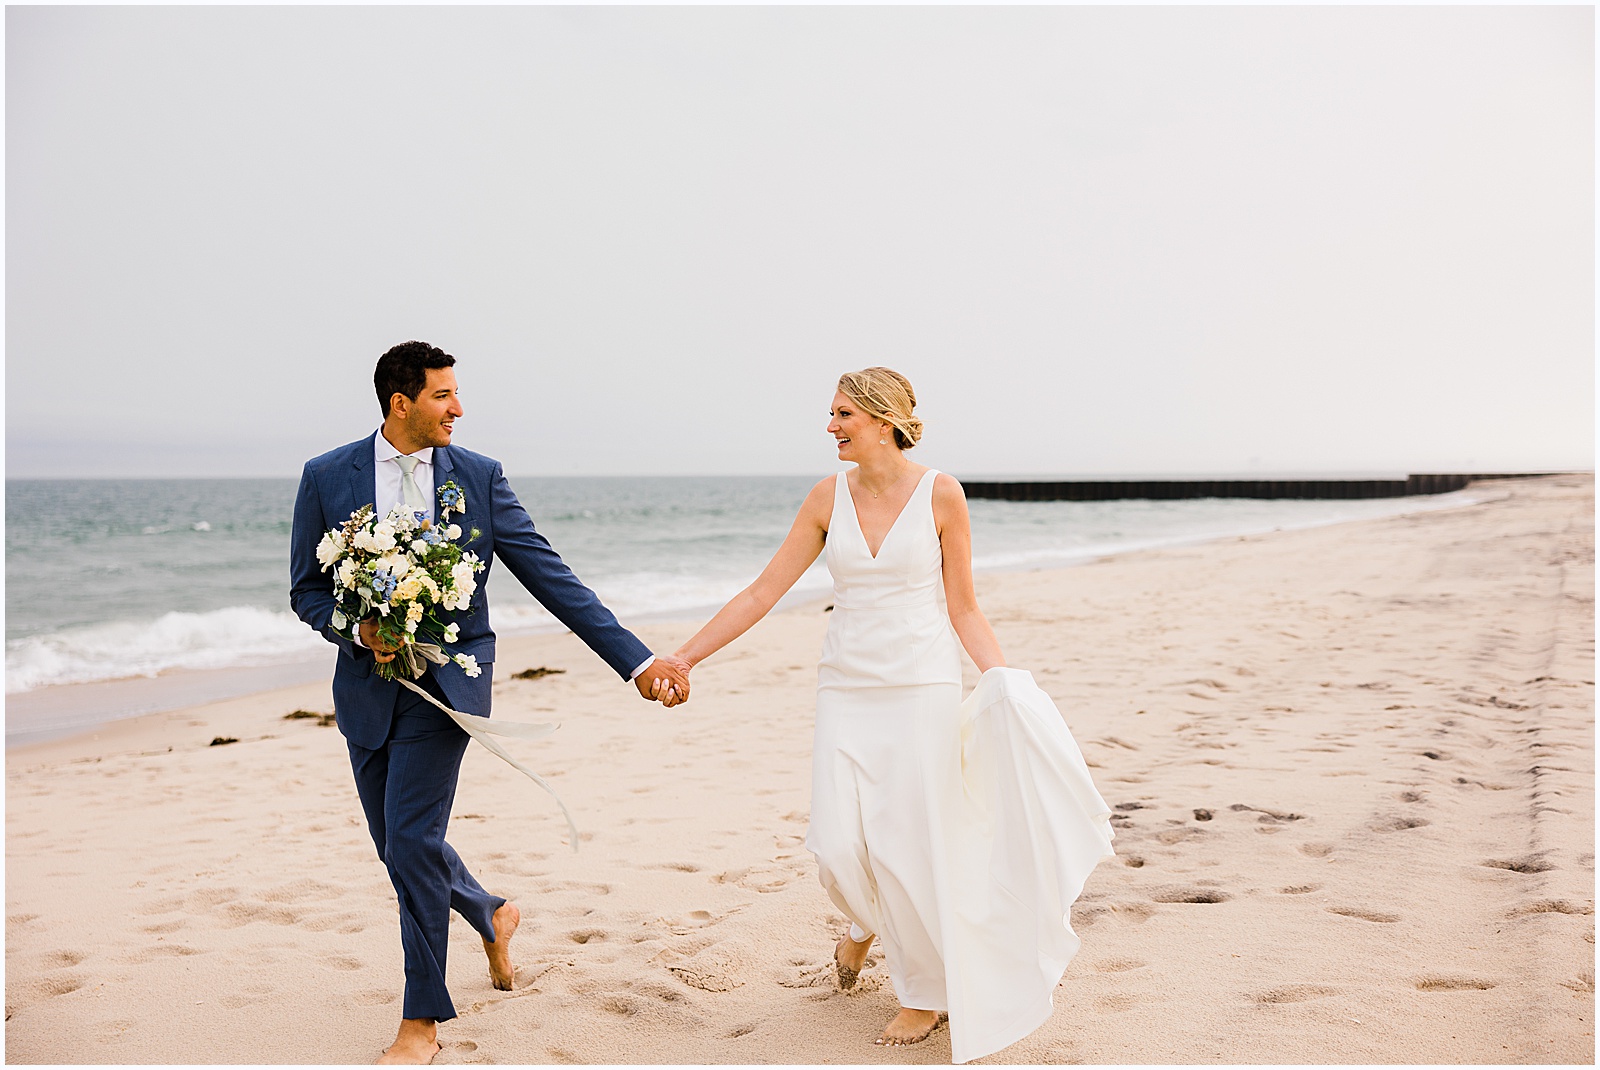 A bride and groom hold hands and run down a beach towards a New Jersey wedding photographer.